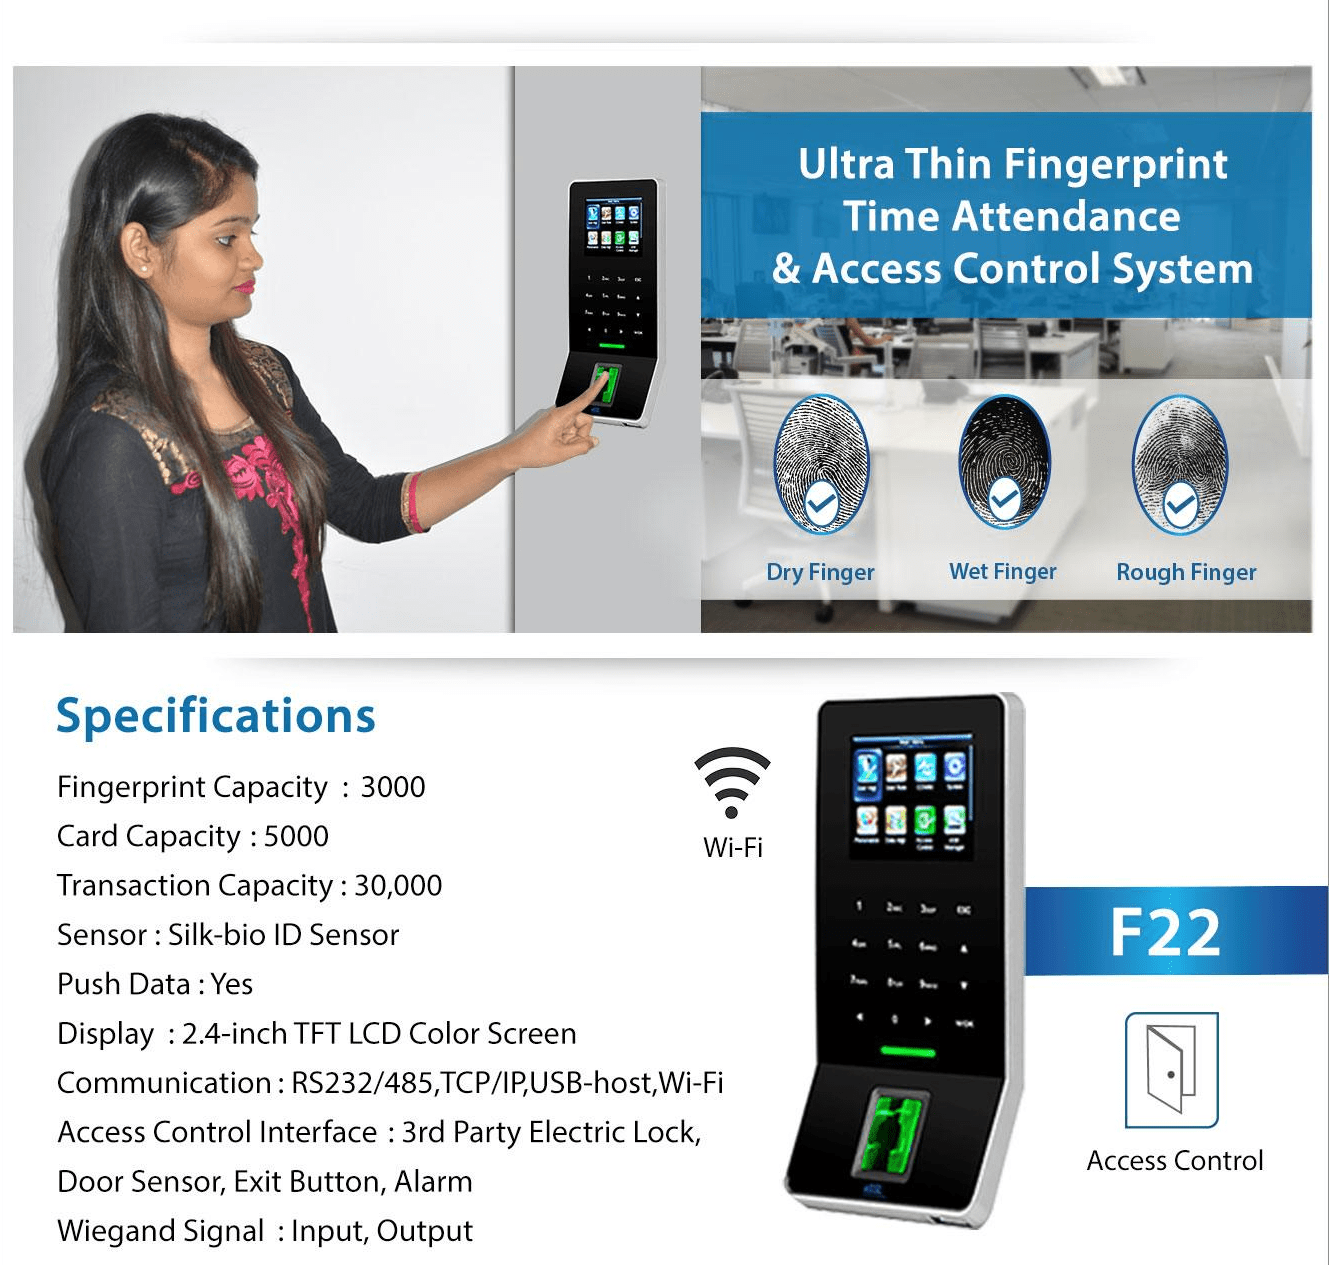 Ultra-thin Wi-Fi based Time Attendance & Access Control System